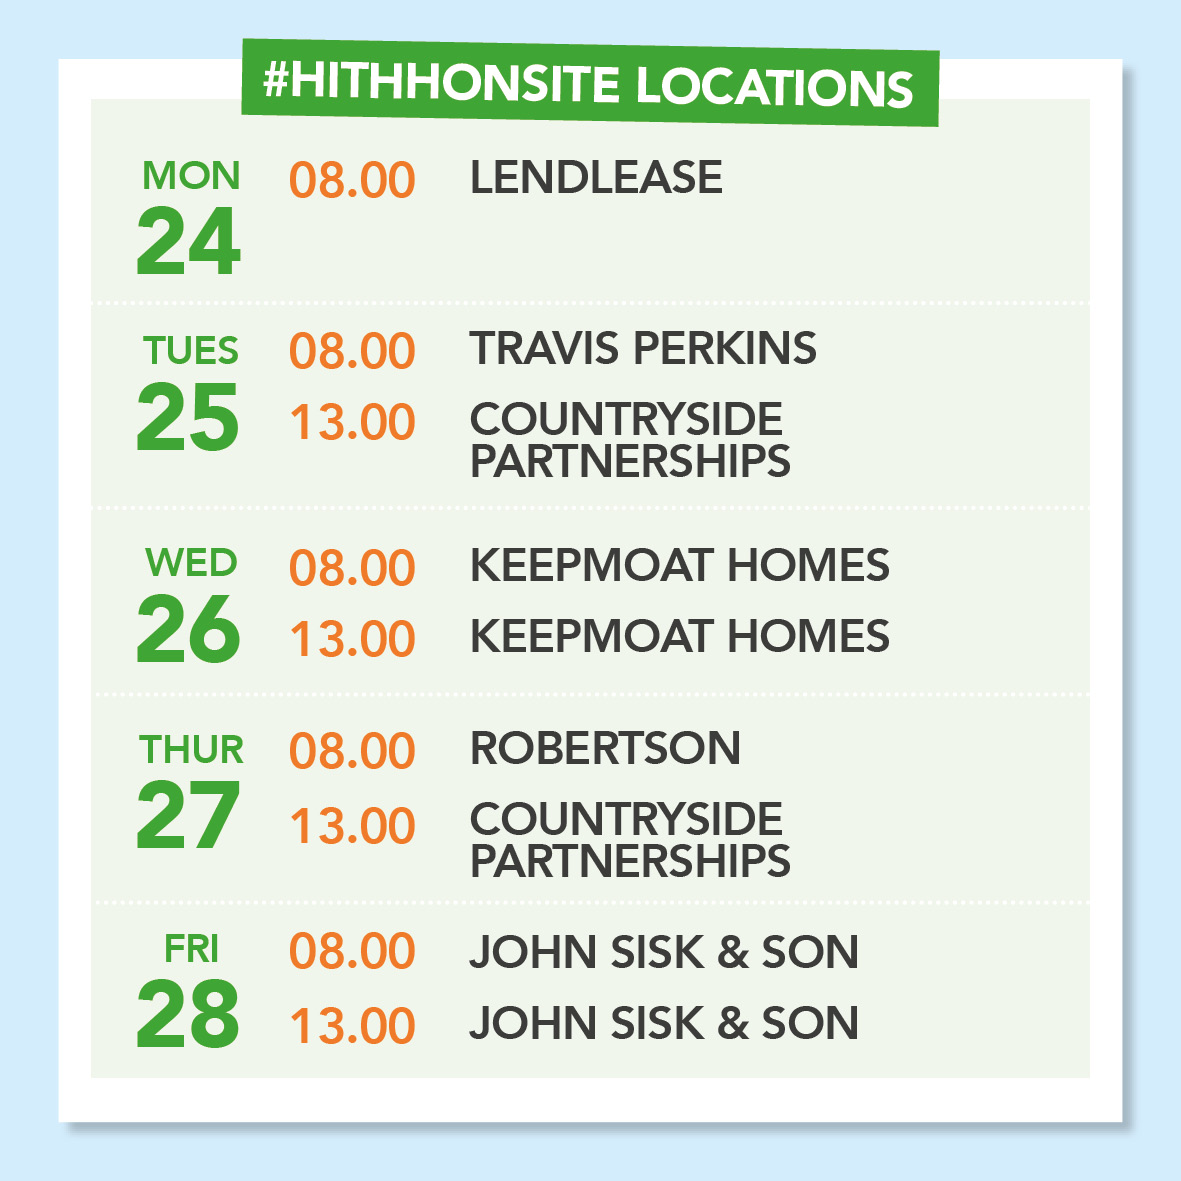 WE'RE COMING TO THE NORTH WEST! Next week, we'll be visiting sites in Manchester, Liverpool and Warrington to meet the boots on the ground and spread the message about #mentalhealthinconstruction. Looking forward to meeting everyone! constructionindustryhelpline.com/hithh-on-site.…